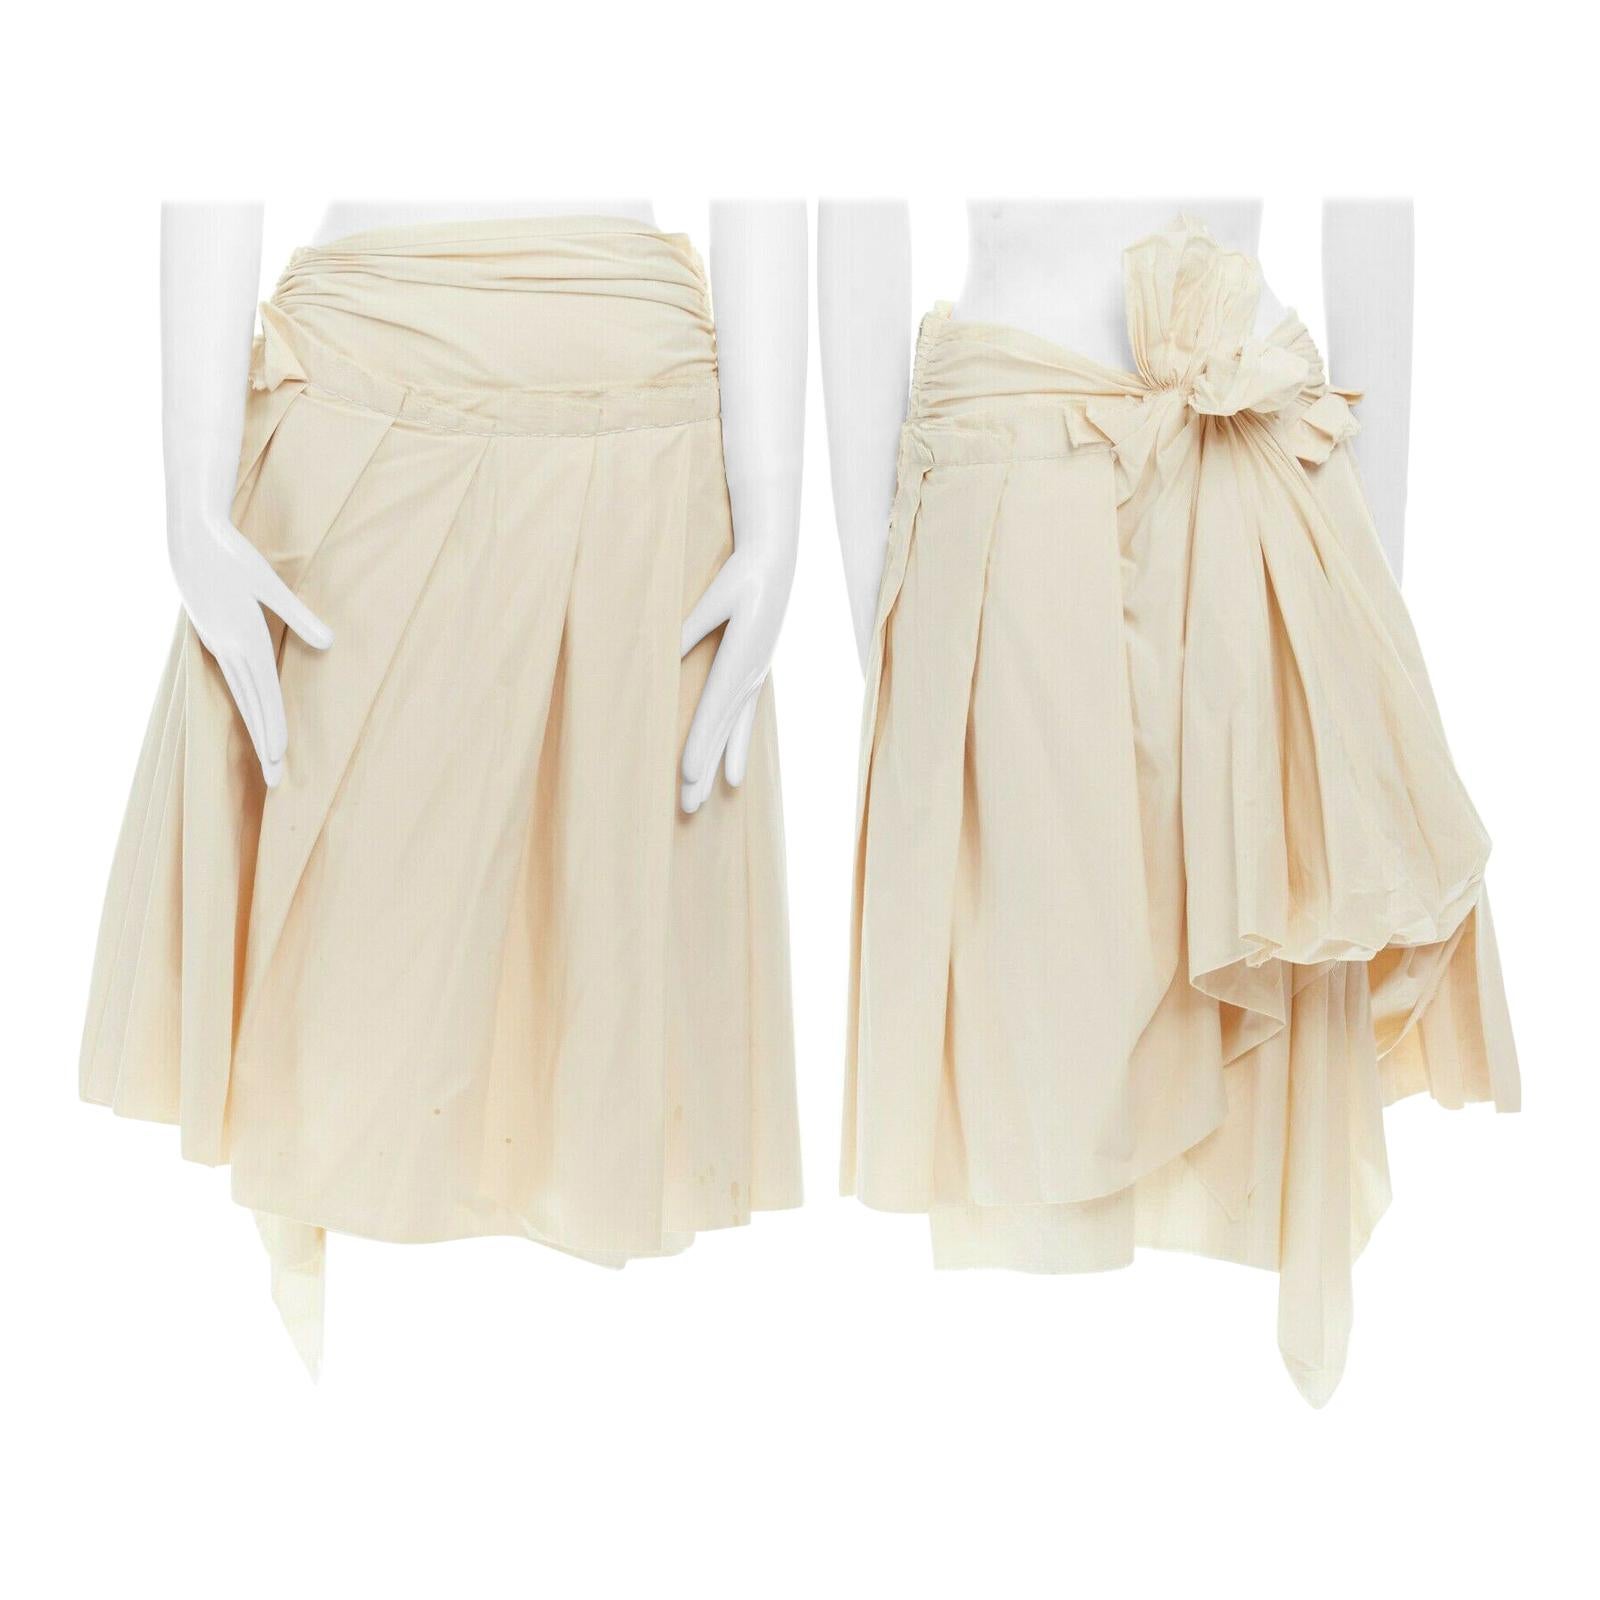 COMME DES GARCONS SS2006 beige cotton pleated bow bustle layered skirt S 27"